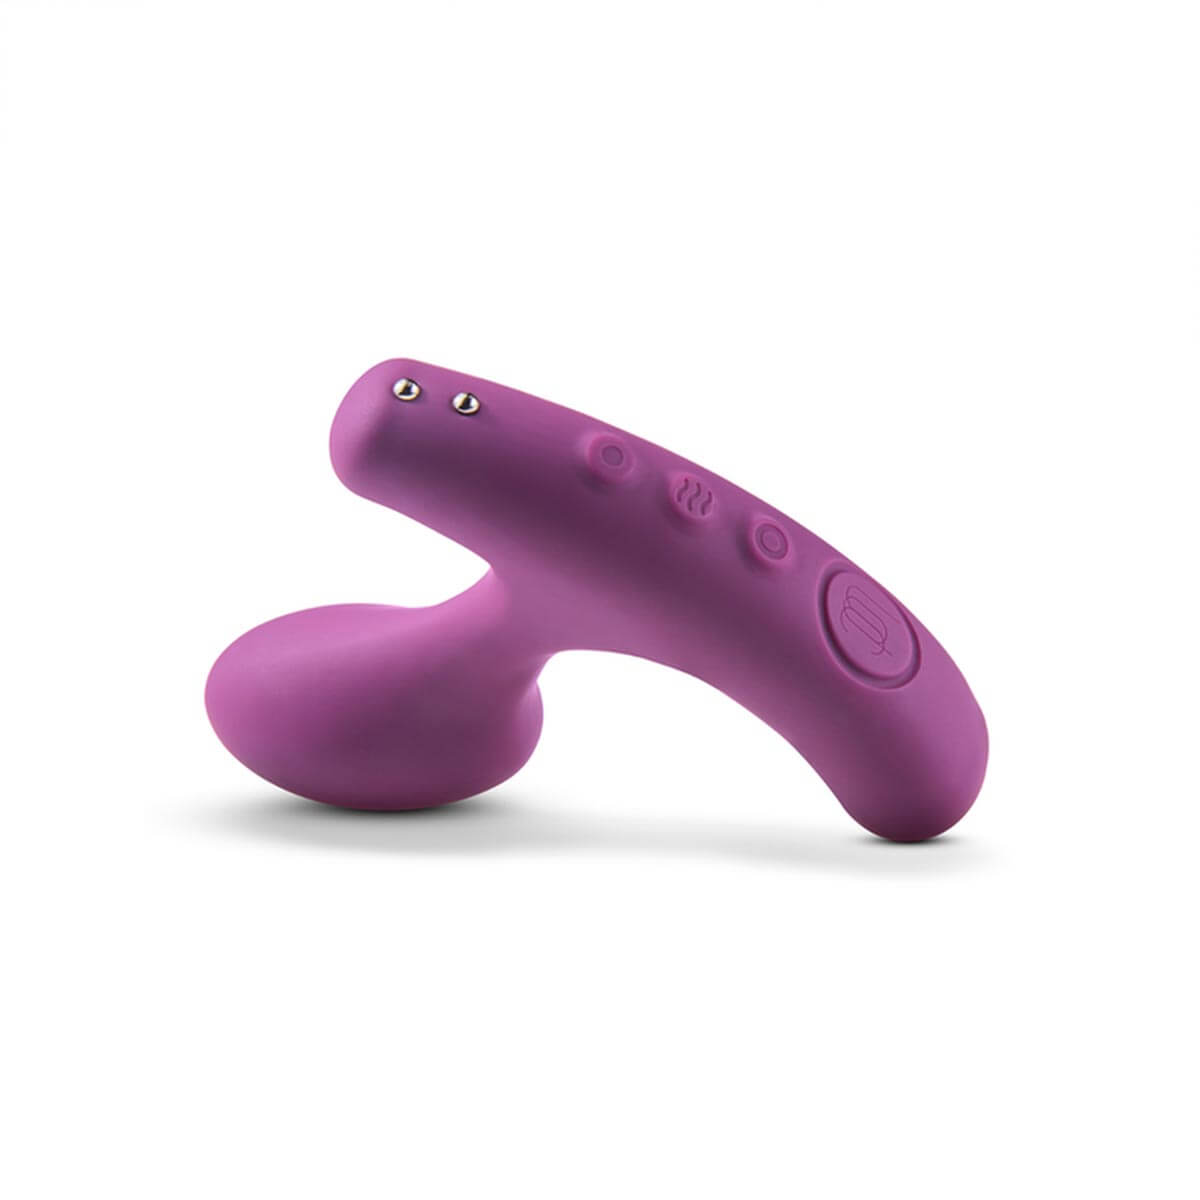 Top view of a purple silicone vibrator with a bulbous end for internal stimulation and a longer arm for external stimulation with buttons on top of external arm Nudie Co